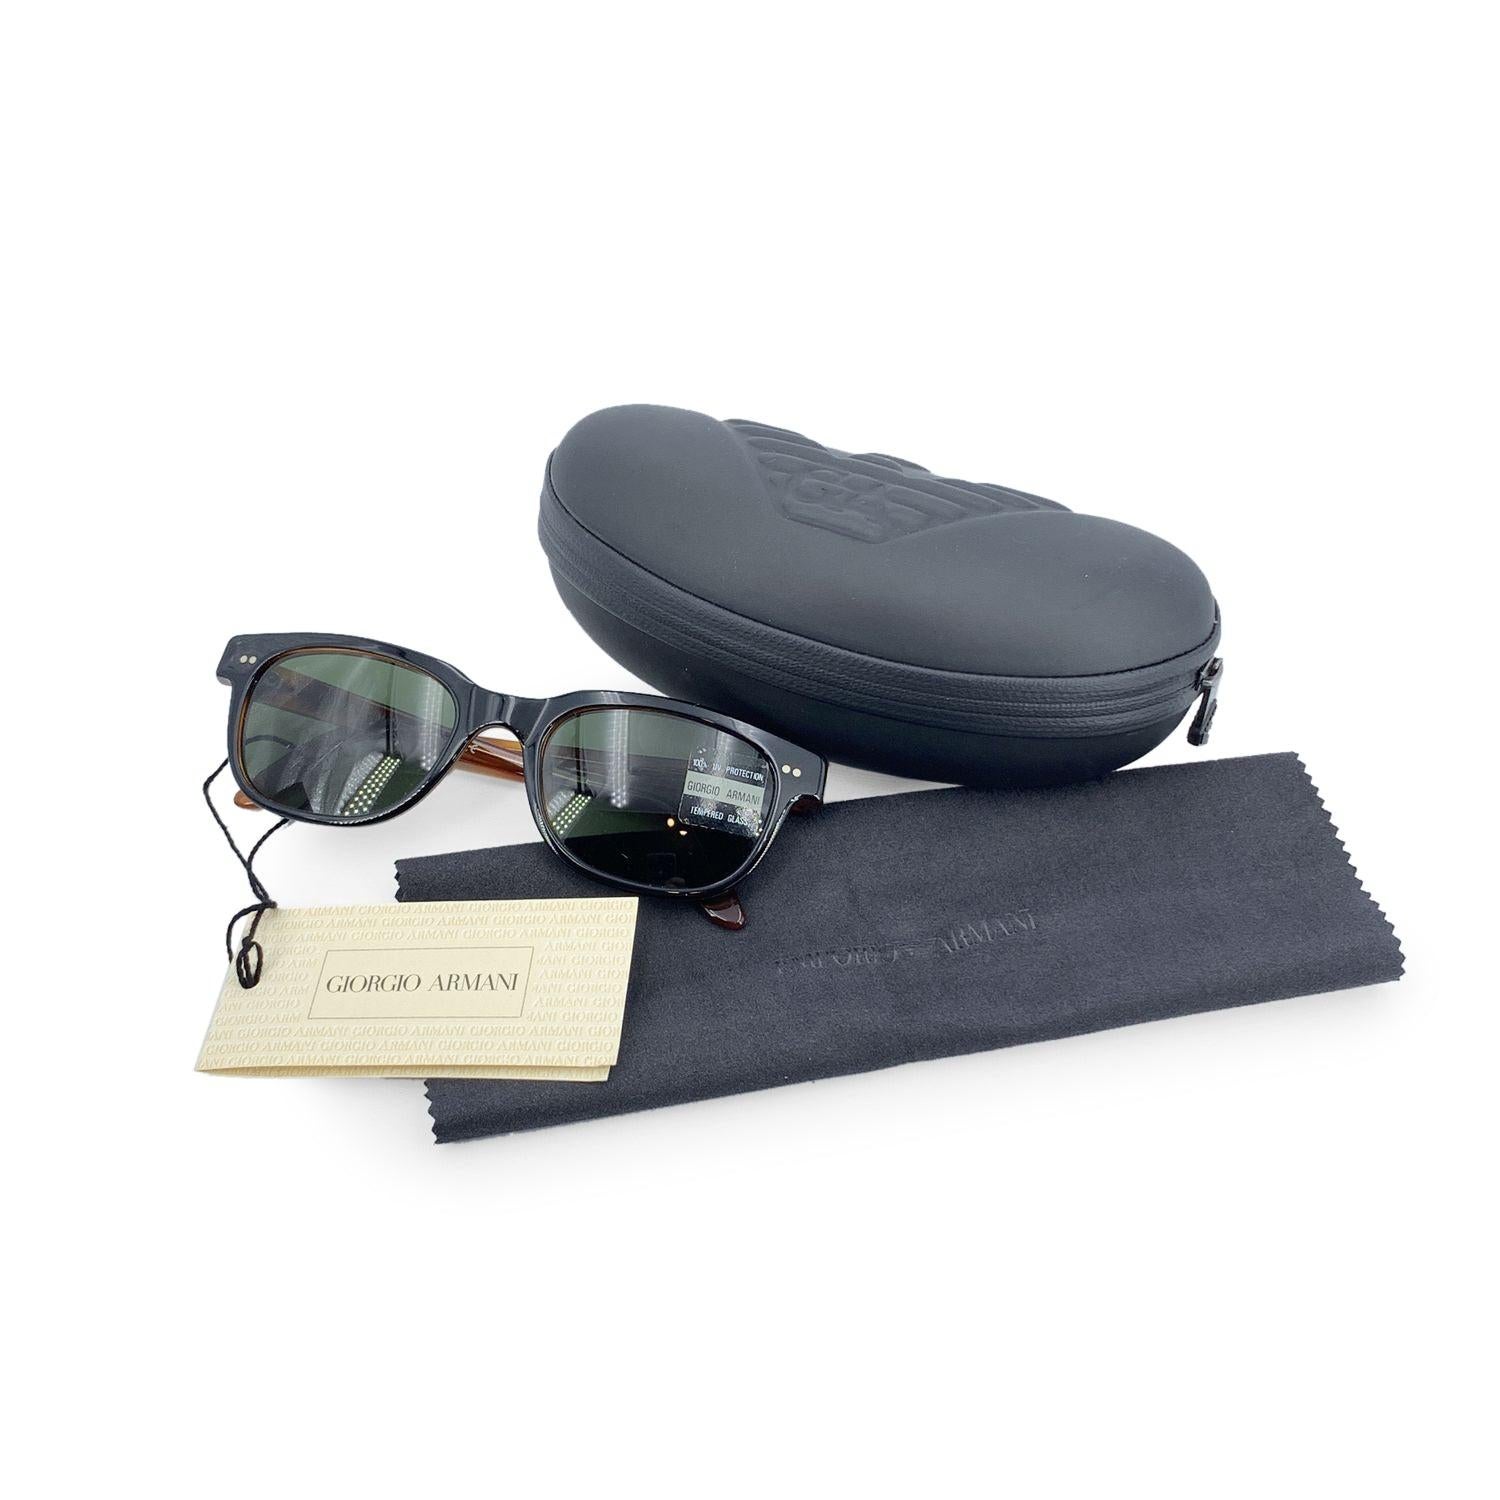 Vintage Giorgio Armani Unisex Sunglasses, Mod. '376-S' - 227 - 51/12 - 140 mm. Black acetate rectangular shaped frame with brown interior and ear stem. Green tempered glass lenses with 100% UV protection. Made in Italy. Details MATERIAL: Plastic